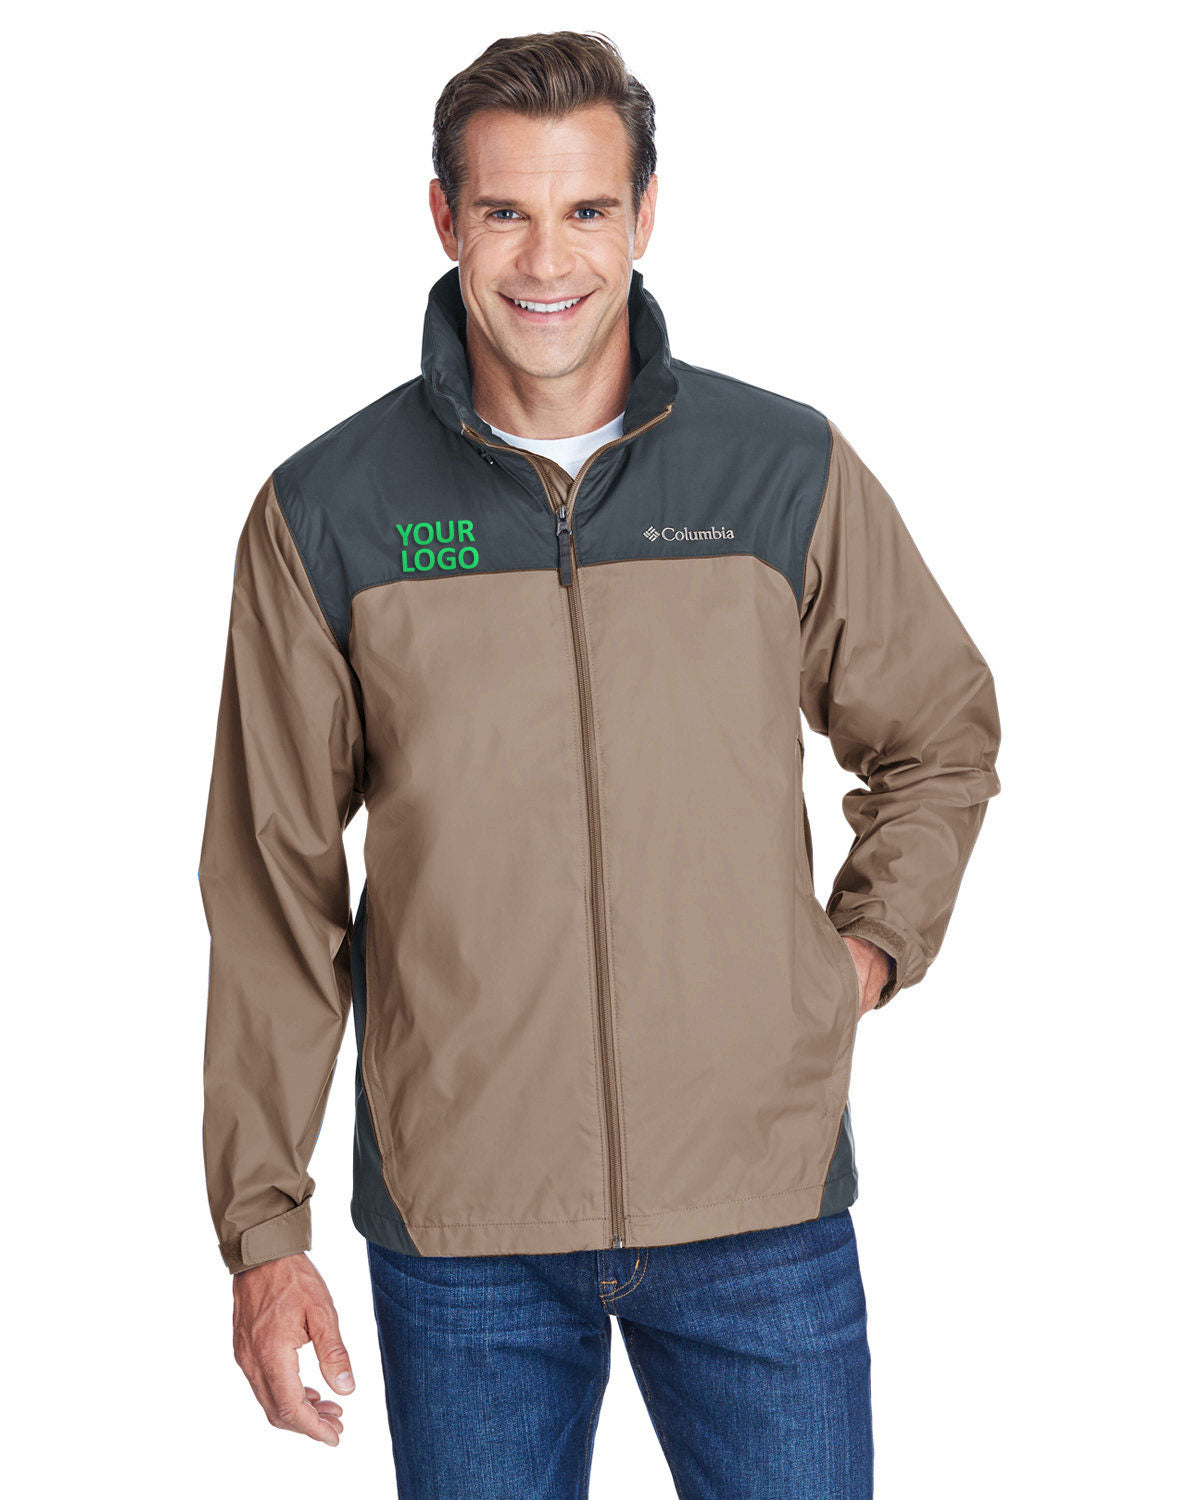 Columbia Tusk/ Grill 2015 team jackets embroidered